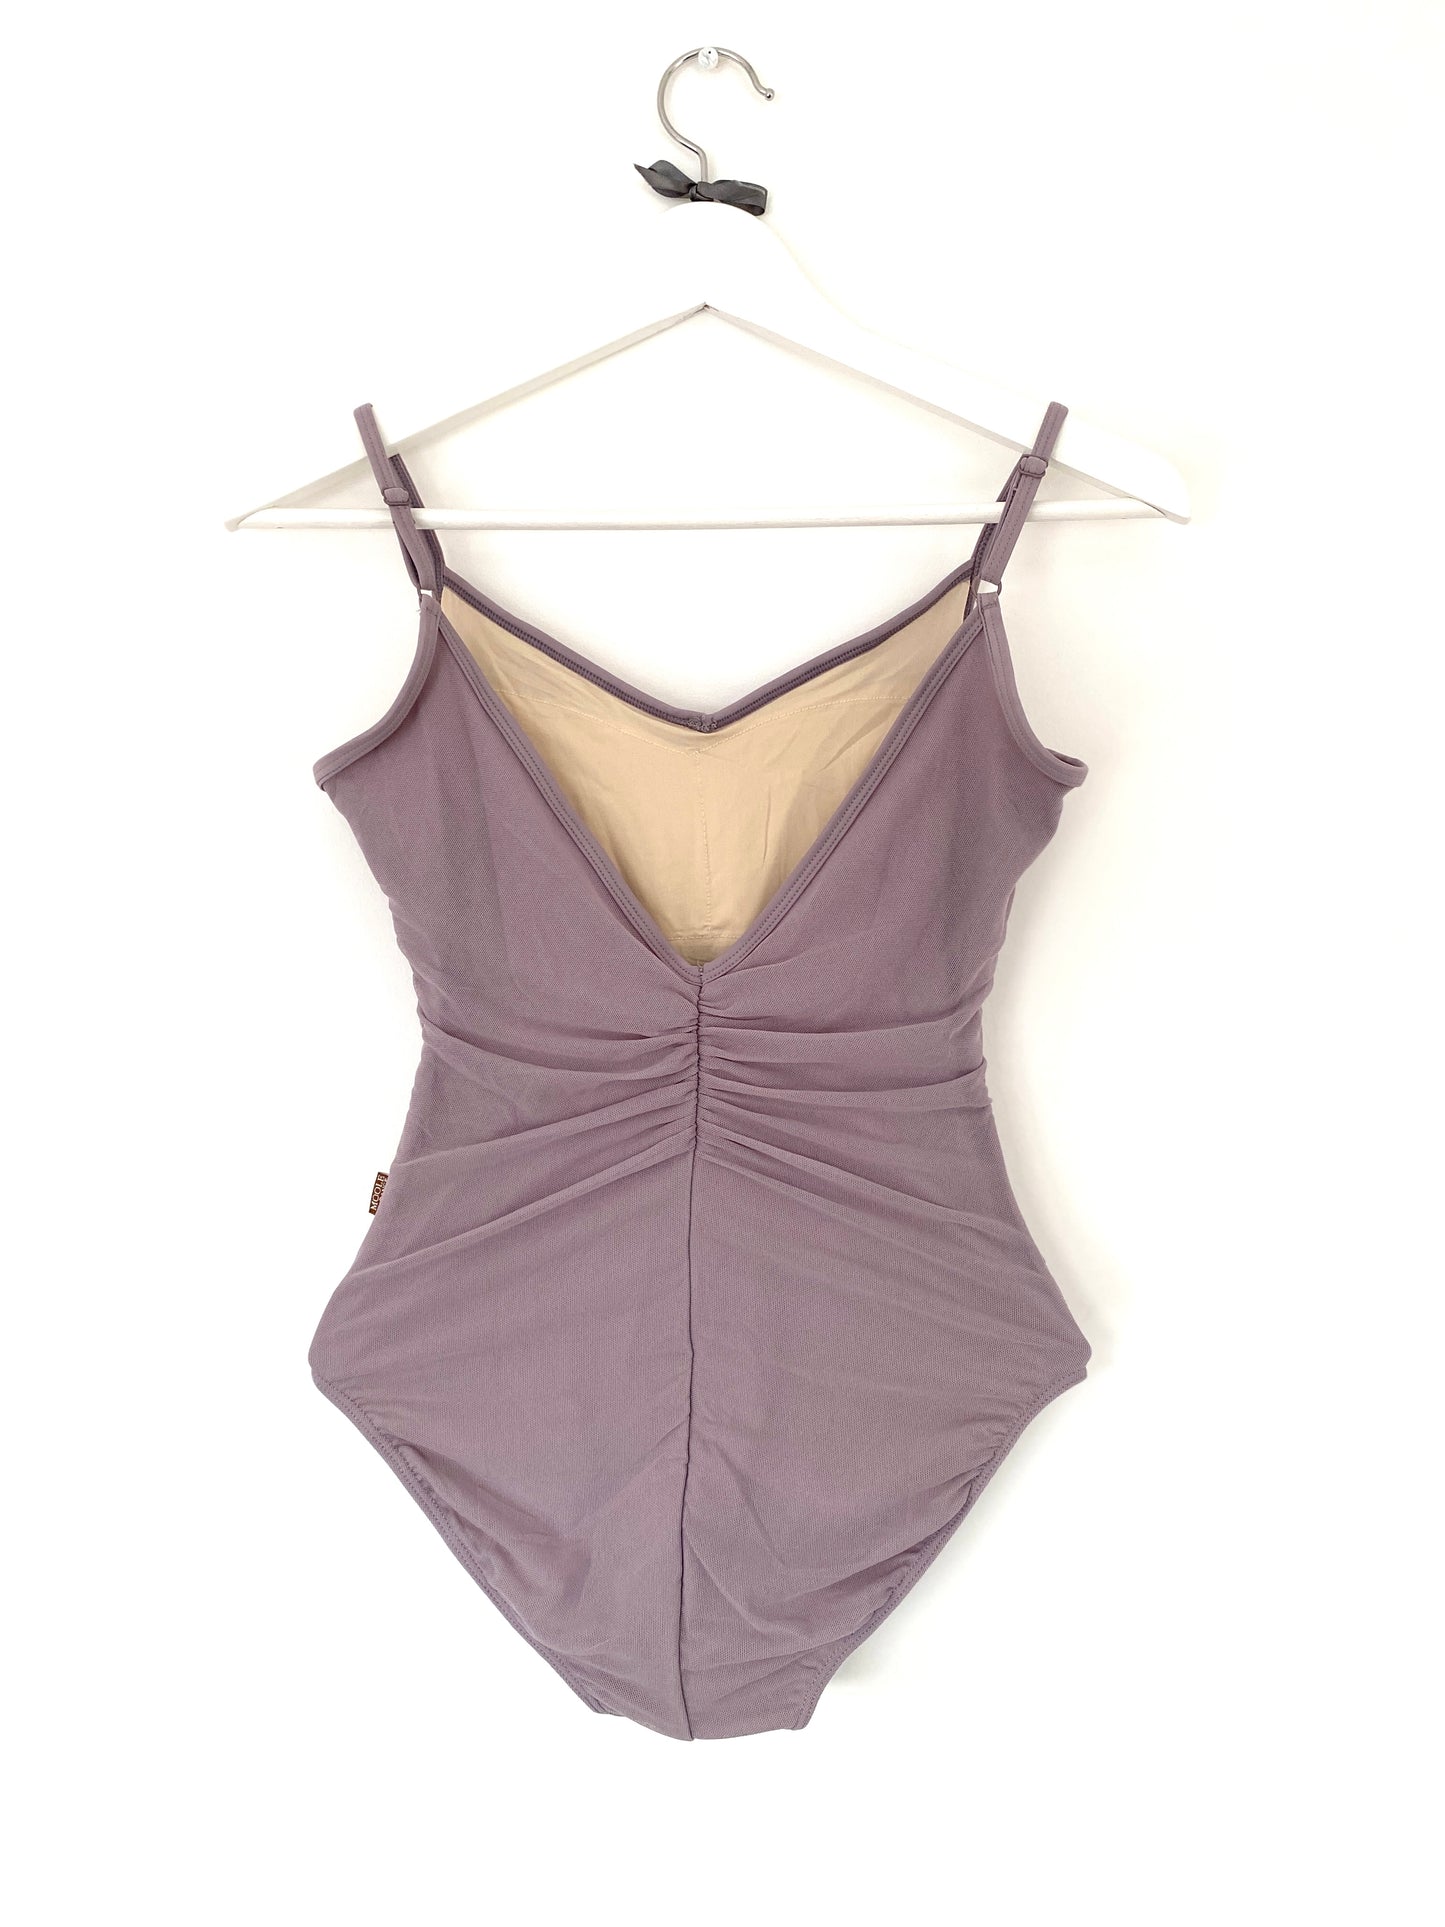 Gathered Mesh Leotard in dusky purple for dance from The Collective Dancewear